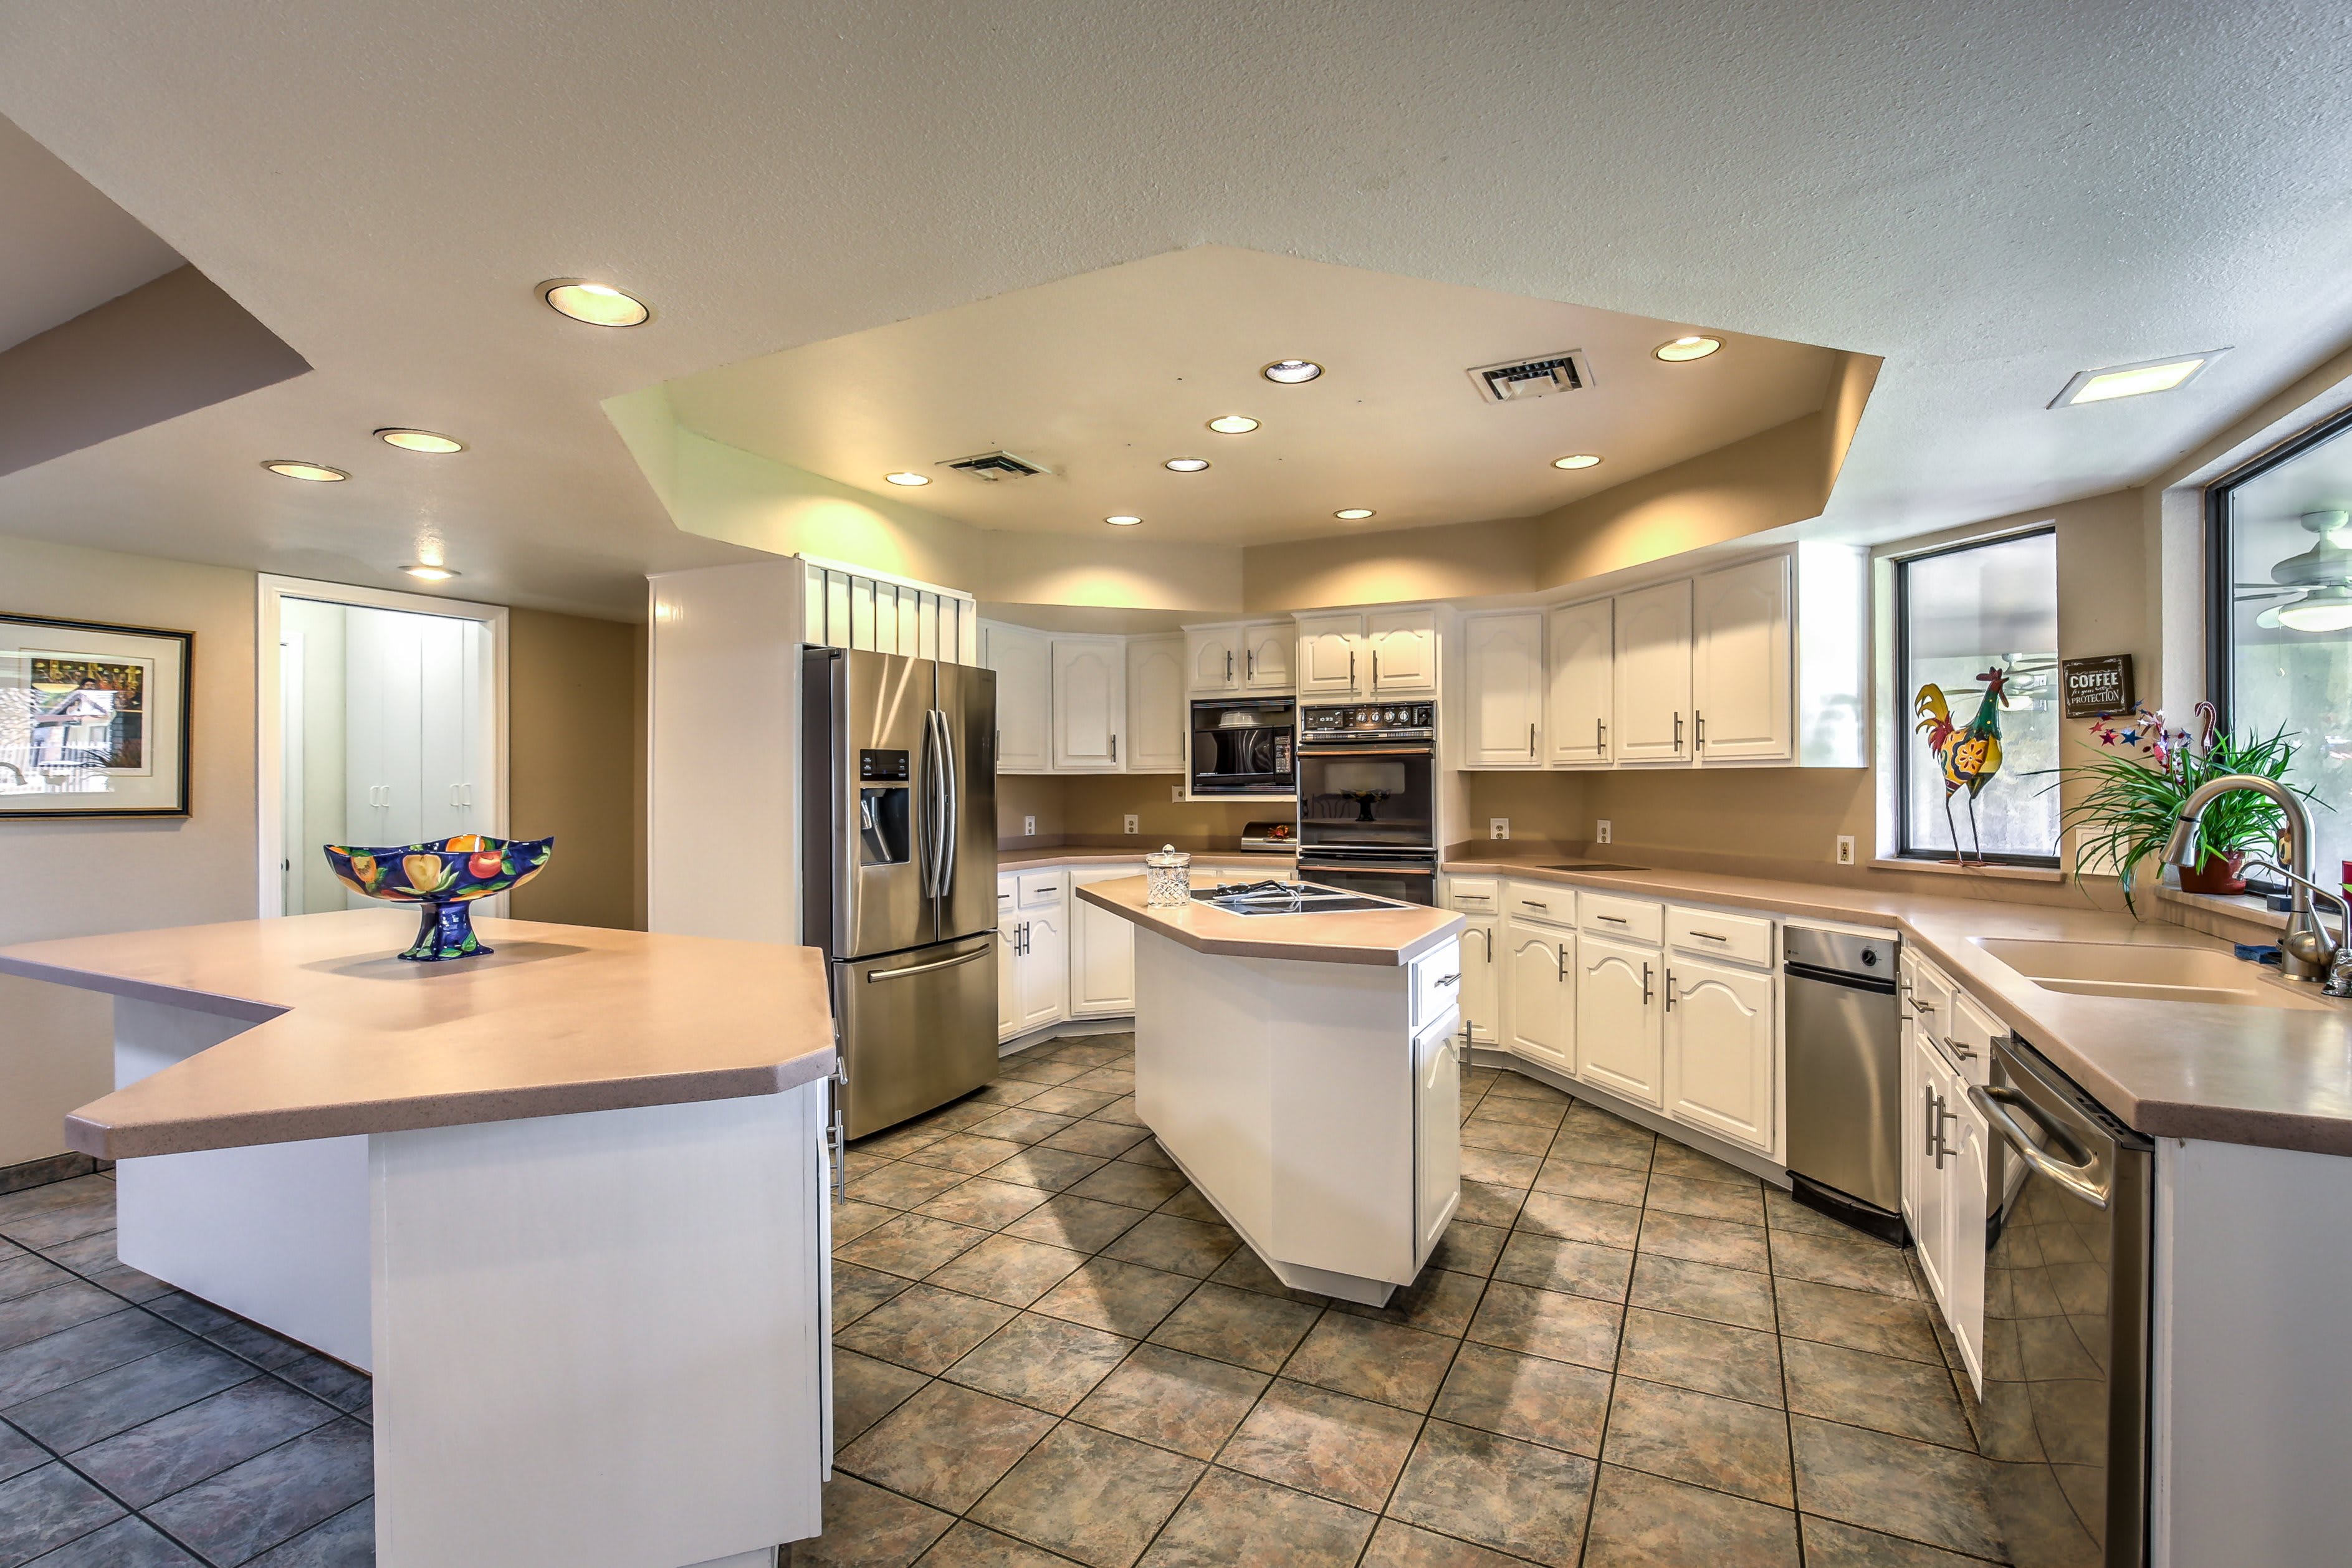 The Quail House - Memory Care communal kitchen